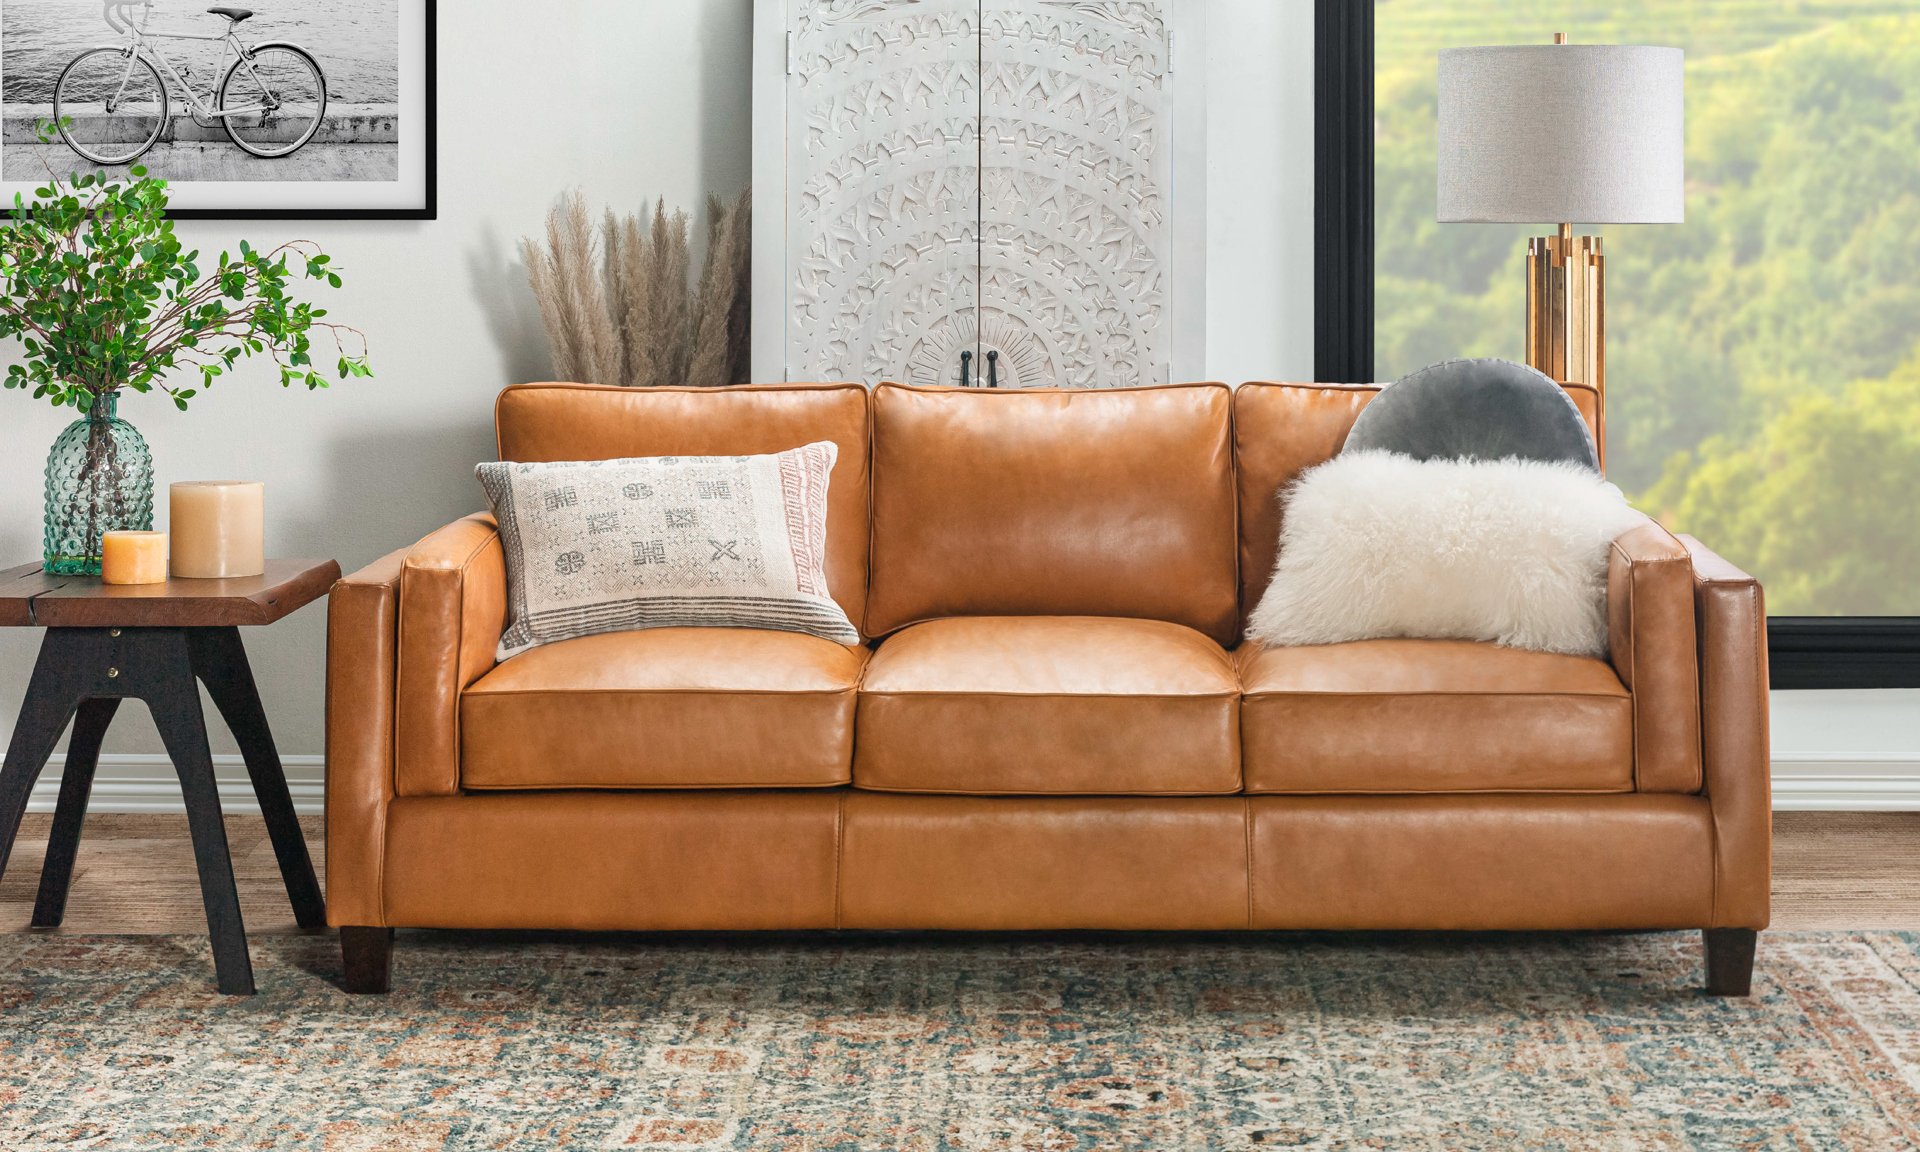 Brown leather sofa  in a living room.